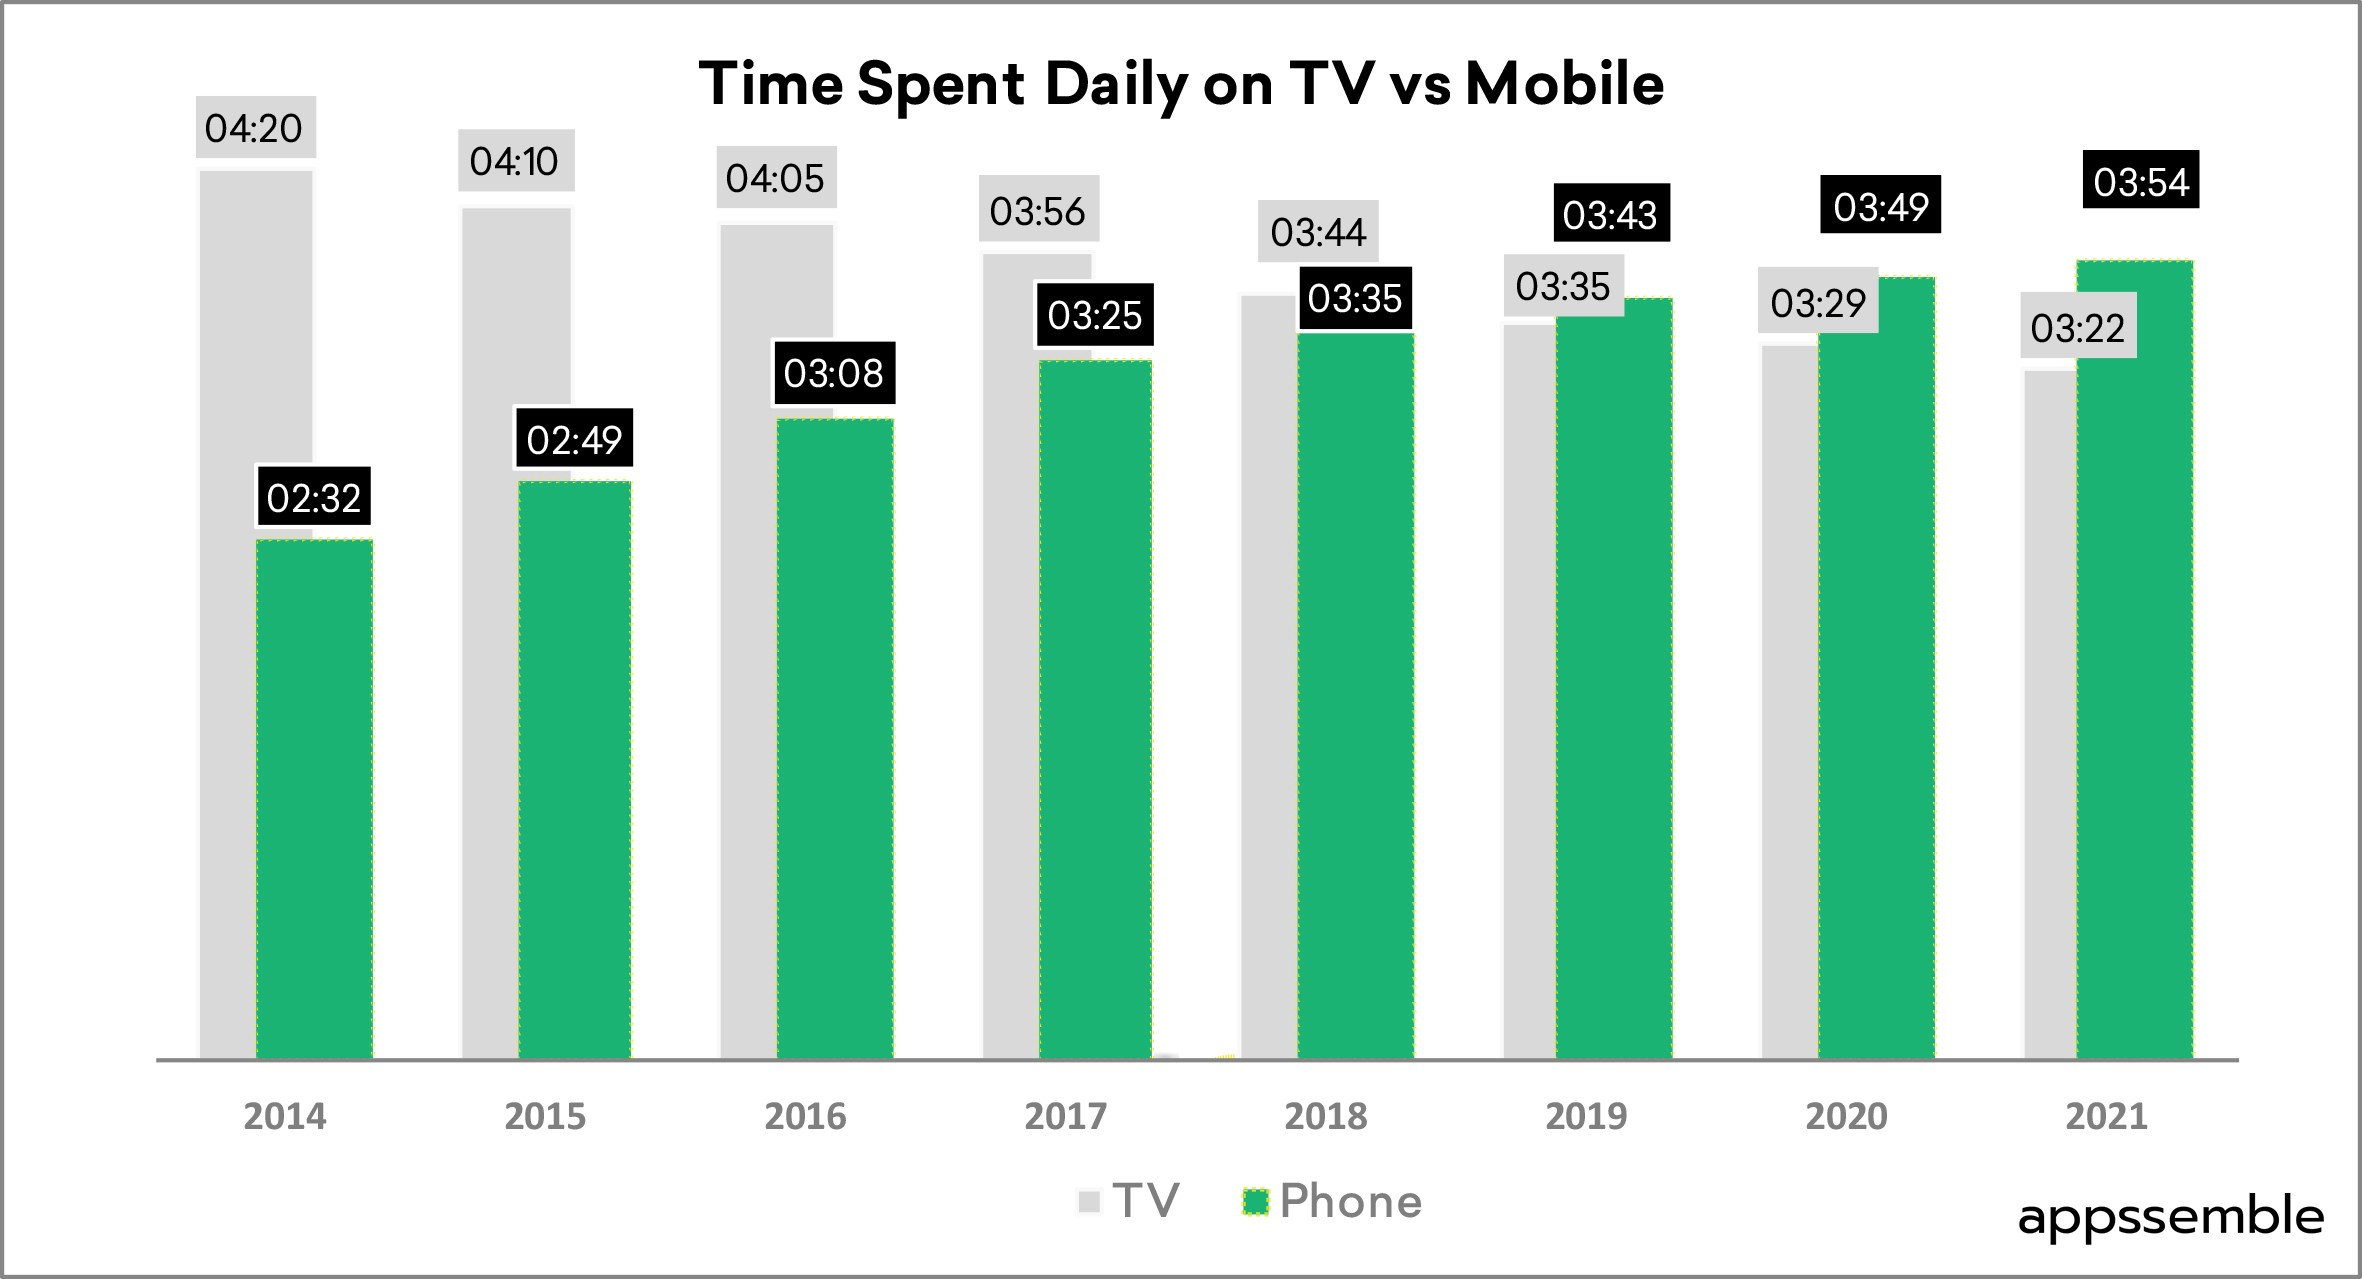 Average time spent daily on TV and on mobile devices